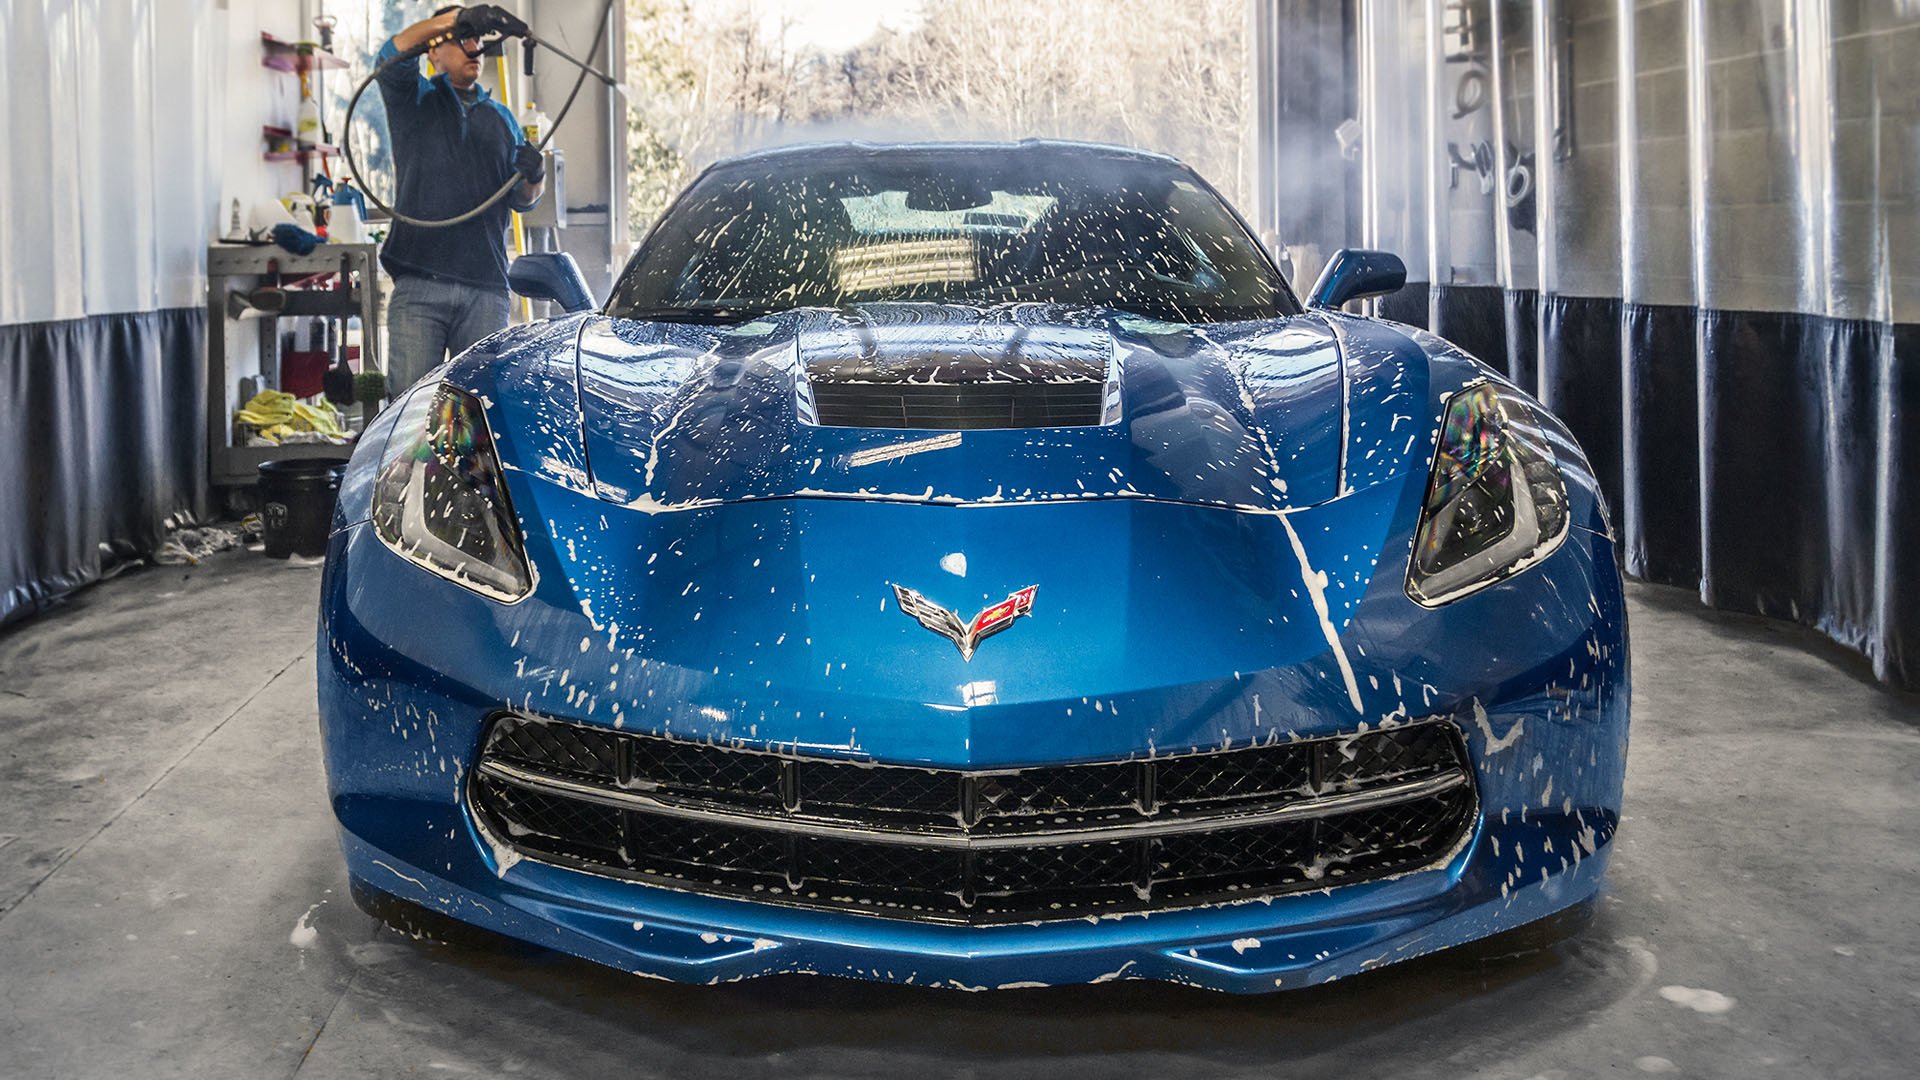 Do You Dry-Wash Your Corvette?